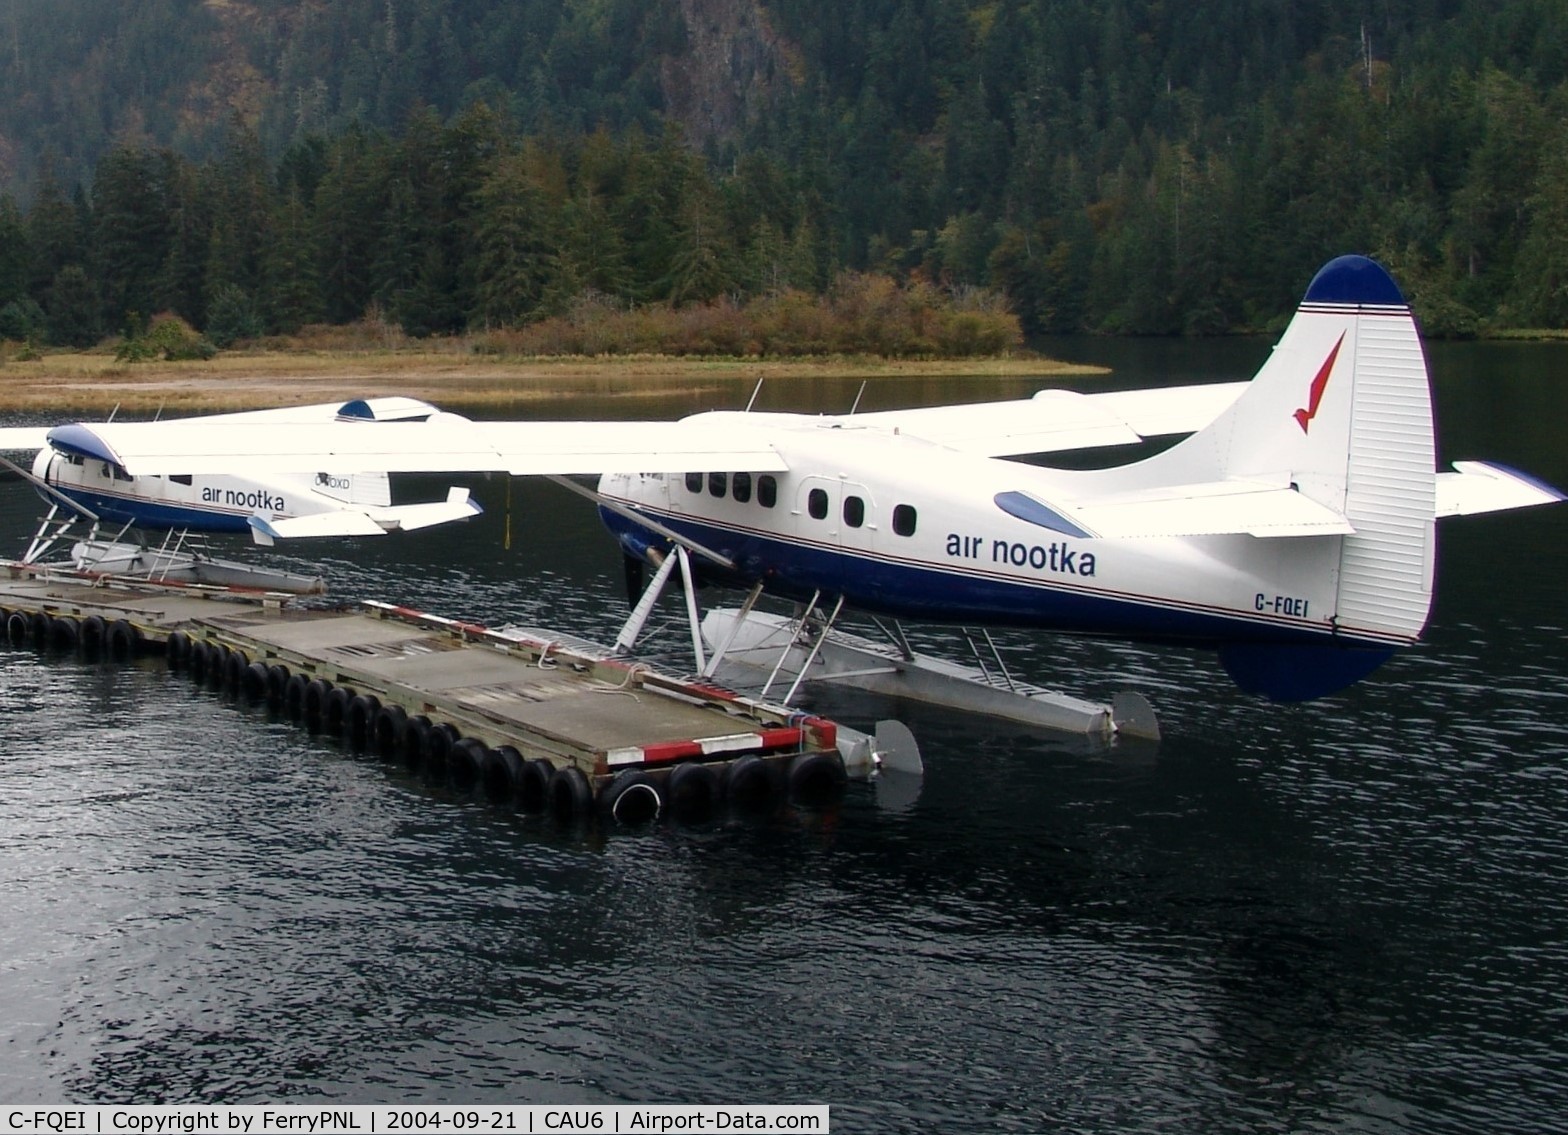 C-FQEI, 1960 De Havilland Canada DHC-3 Turbo Otter C/N 397, Air Nootka DHC3 Otter at its base in Gold River, BC.